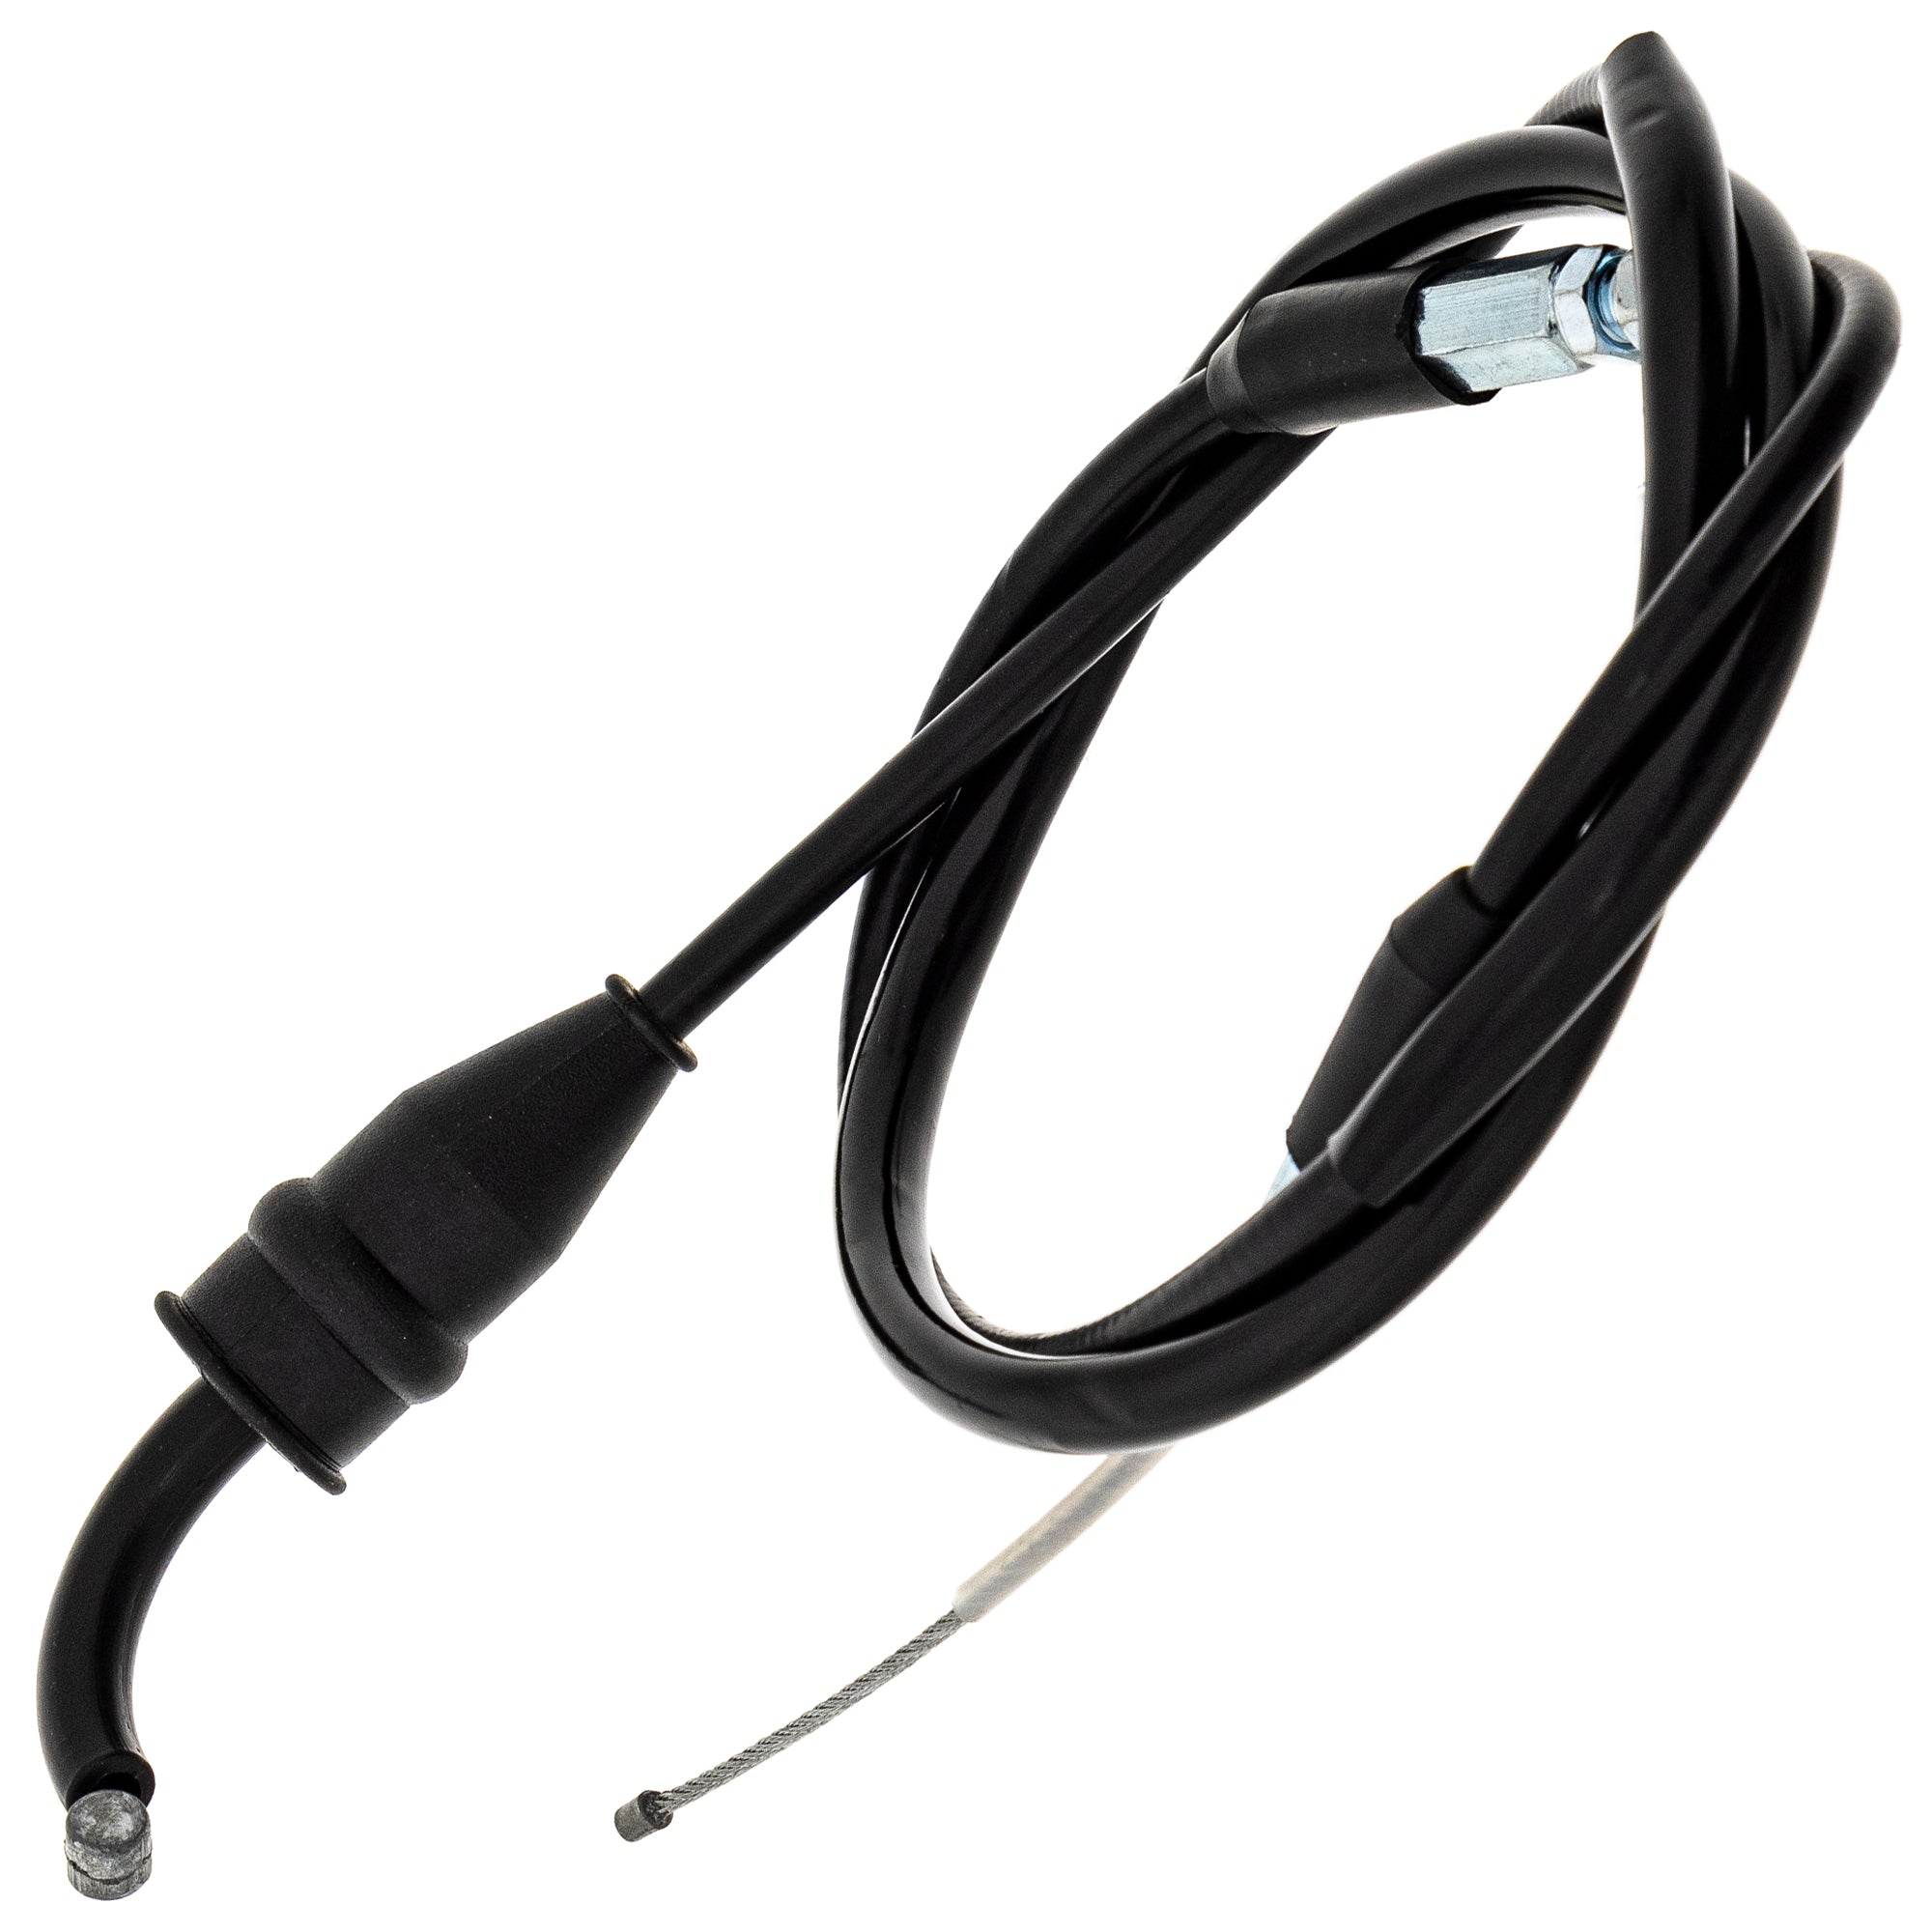 Throttle Cable with Additional 3 Inches for Yamaha MX175 TTR125